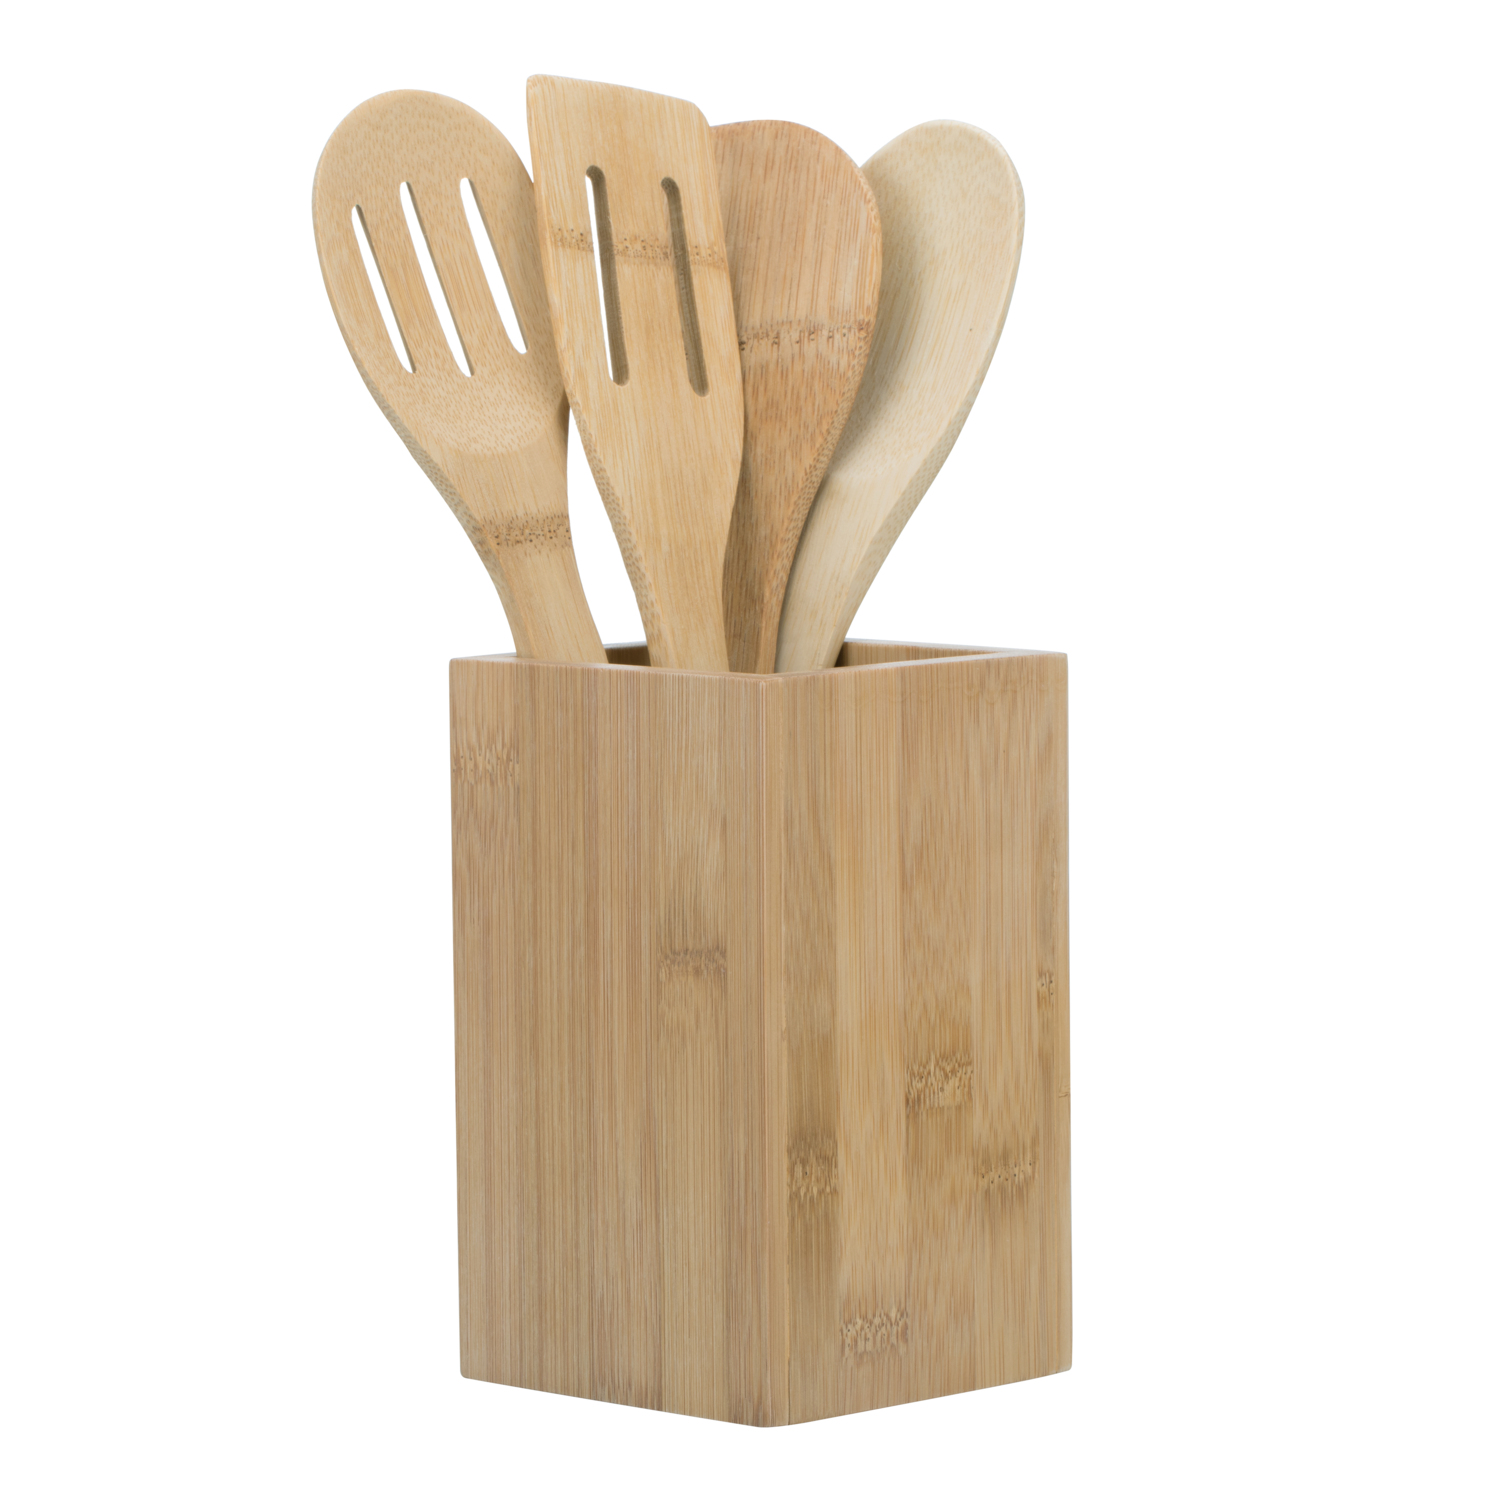 Bamboo Kitchen Utensil and Caddy Set Image 1